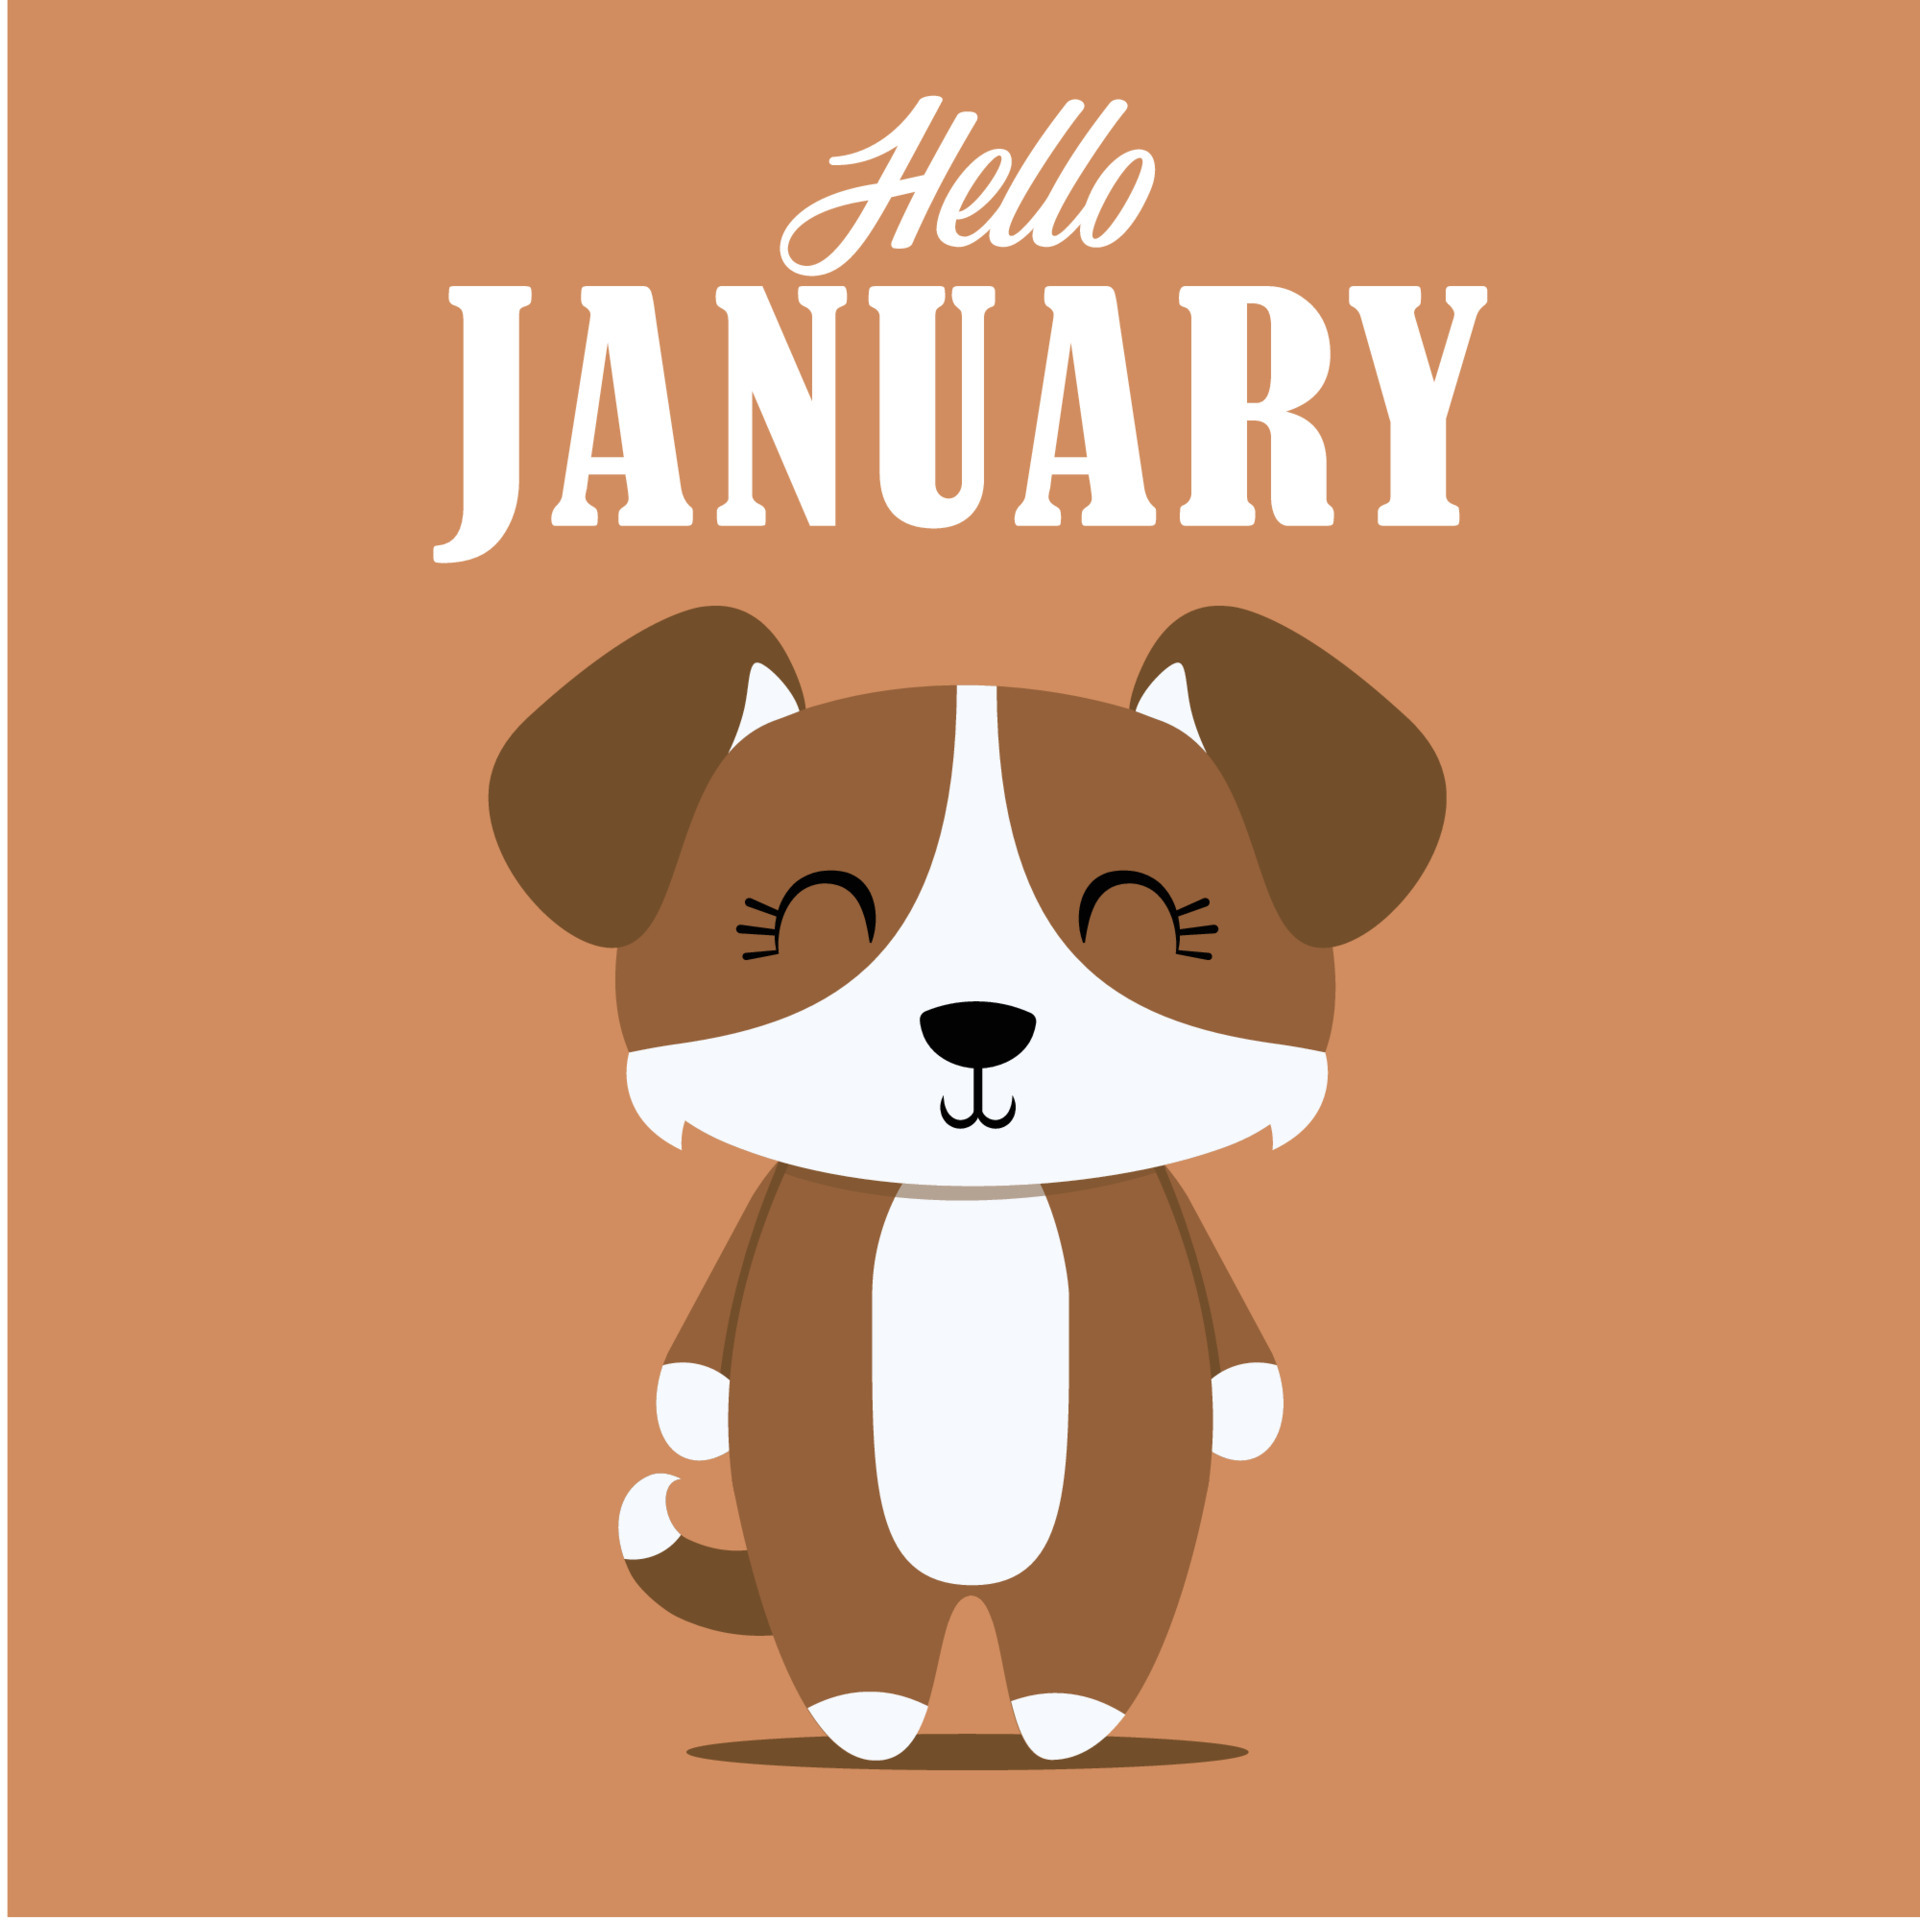 Hello January, a greeting card with a cute and adorable dog animal image,  on a plain colored background that is suitable for template designs,  invitations, and other design needs. 5464254 Vector Art